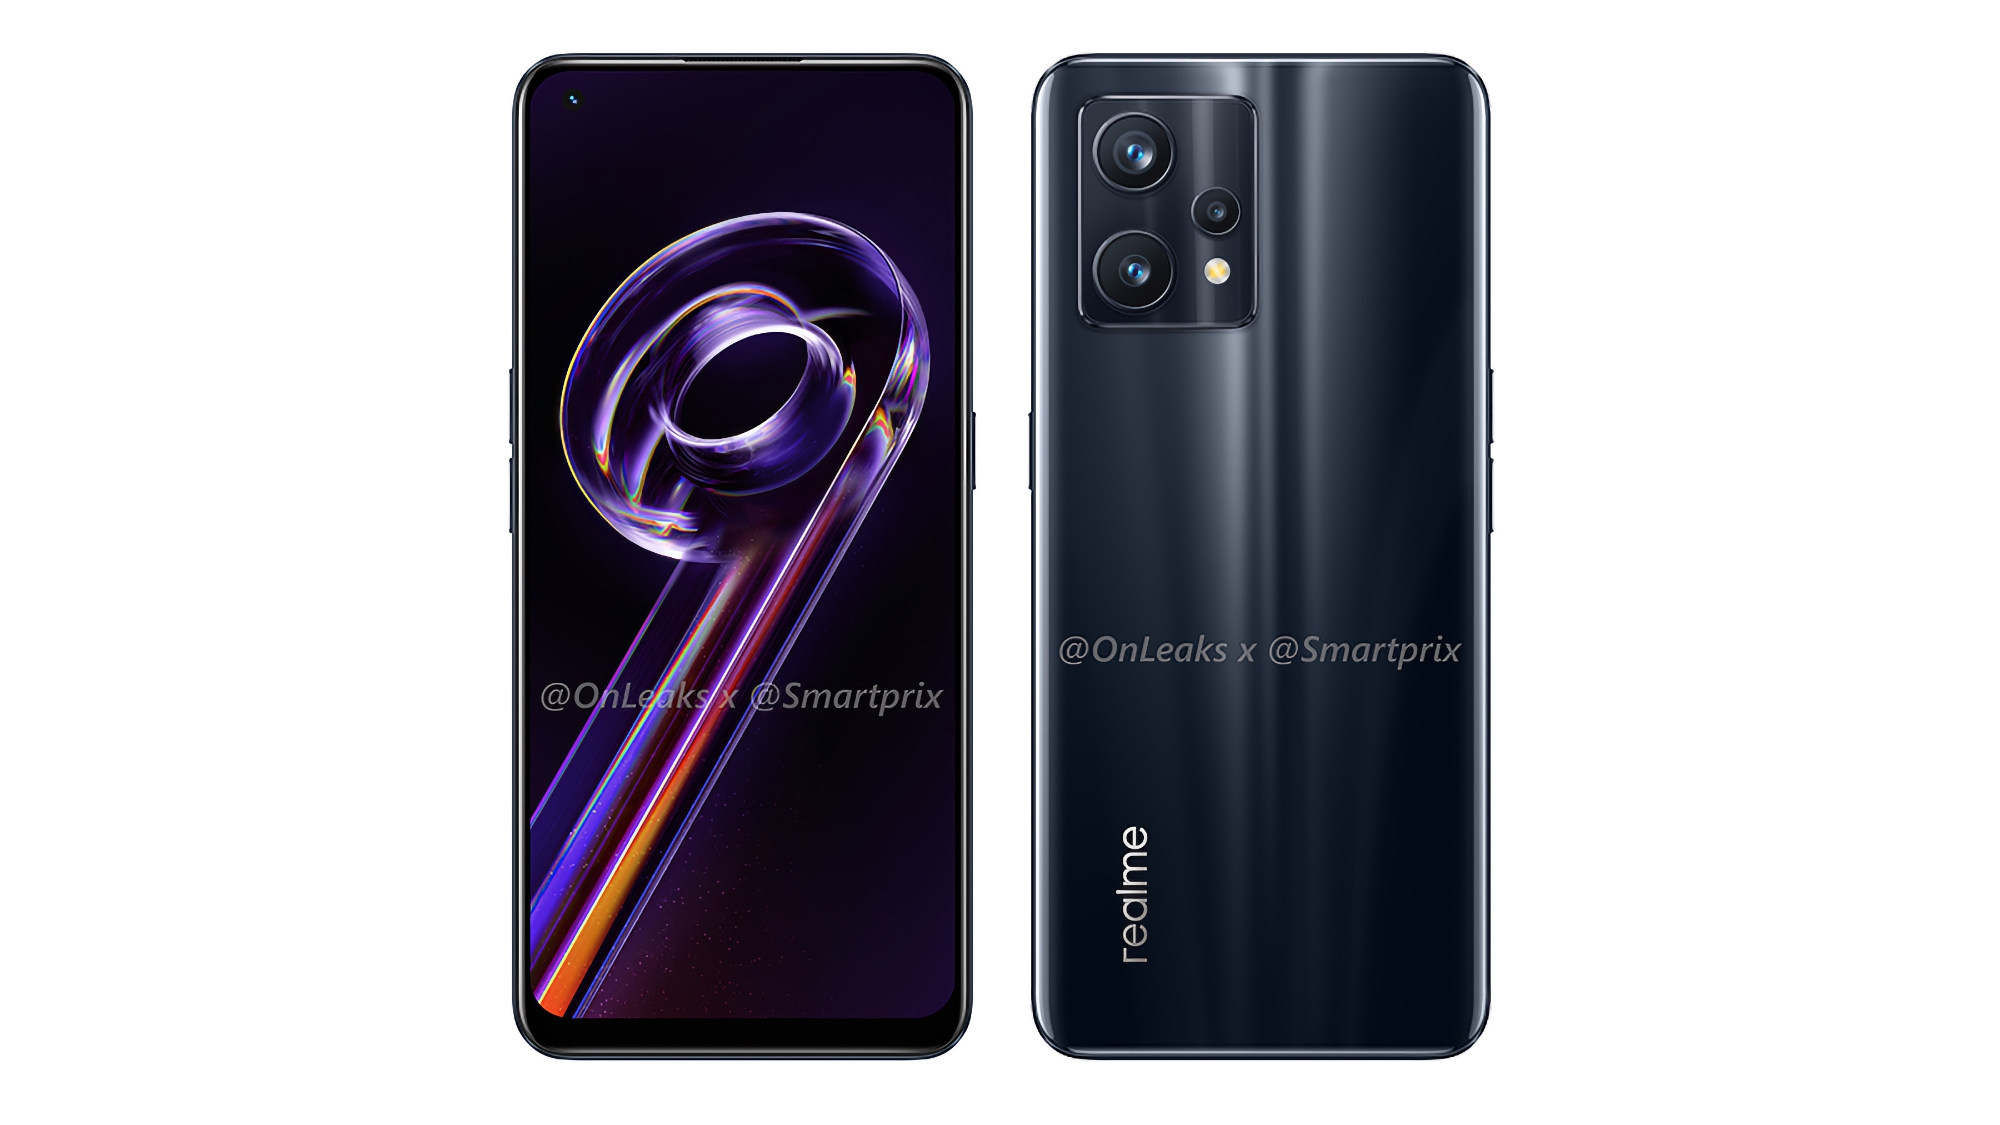 OnLeaks reveals what Realme 9 Pro will look like with Snapdragon 695 chip, 120Hz AMOLED screen and triple camera